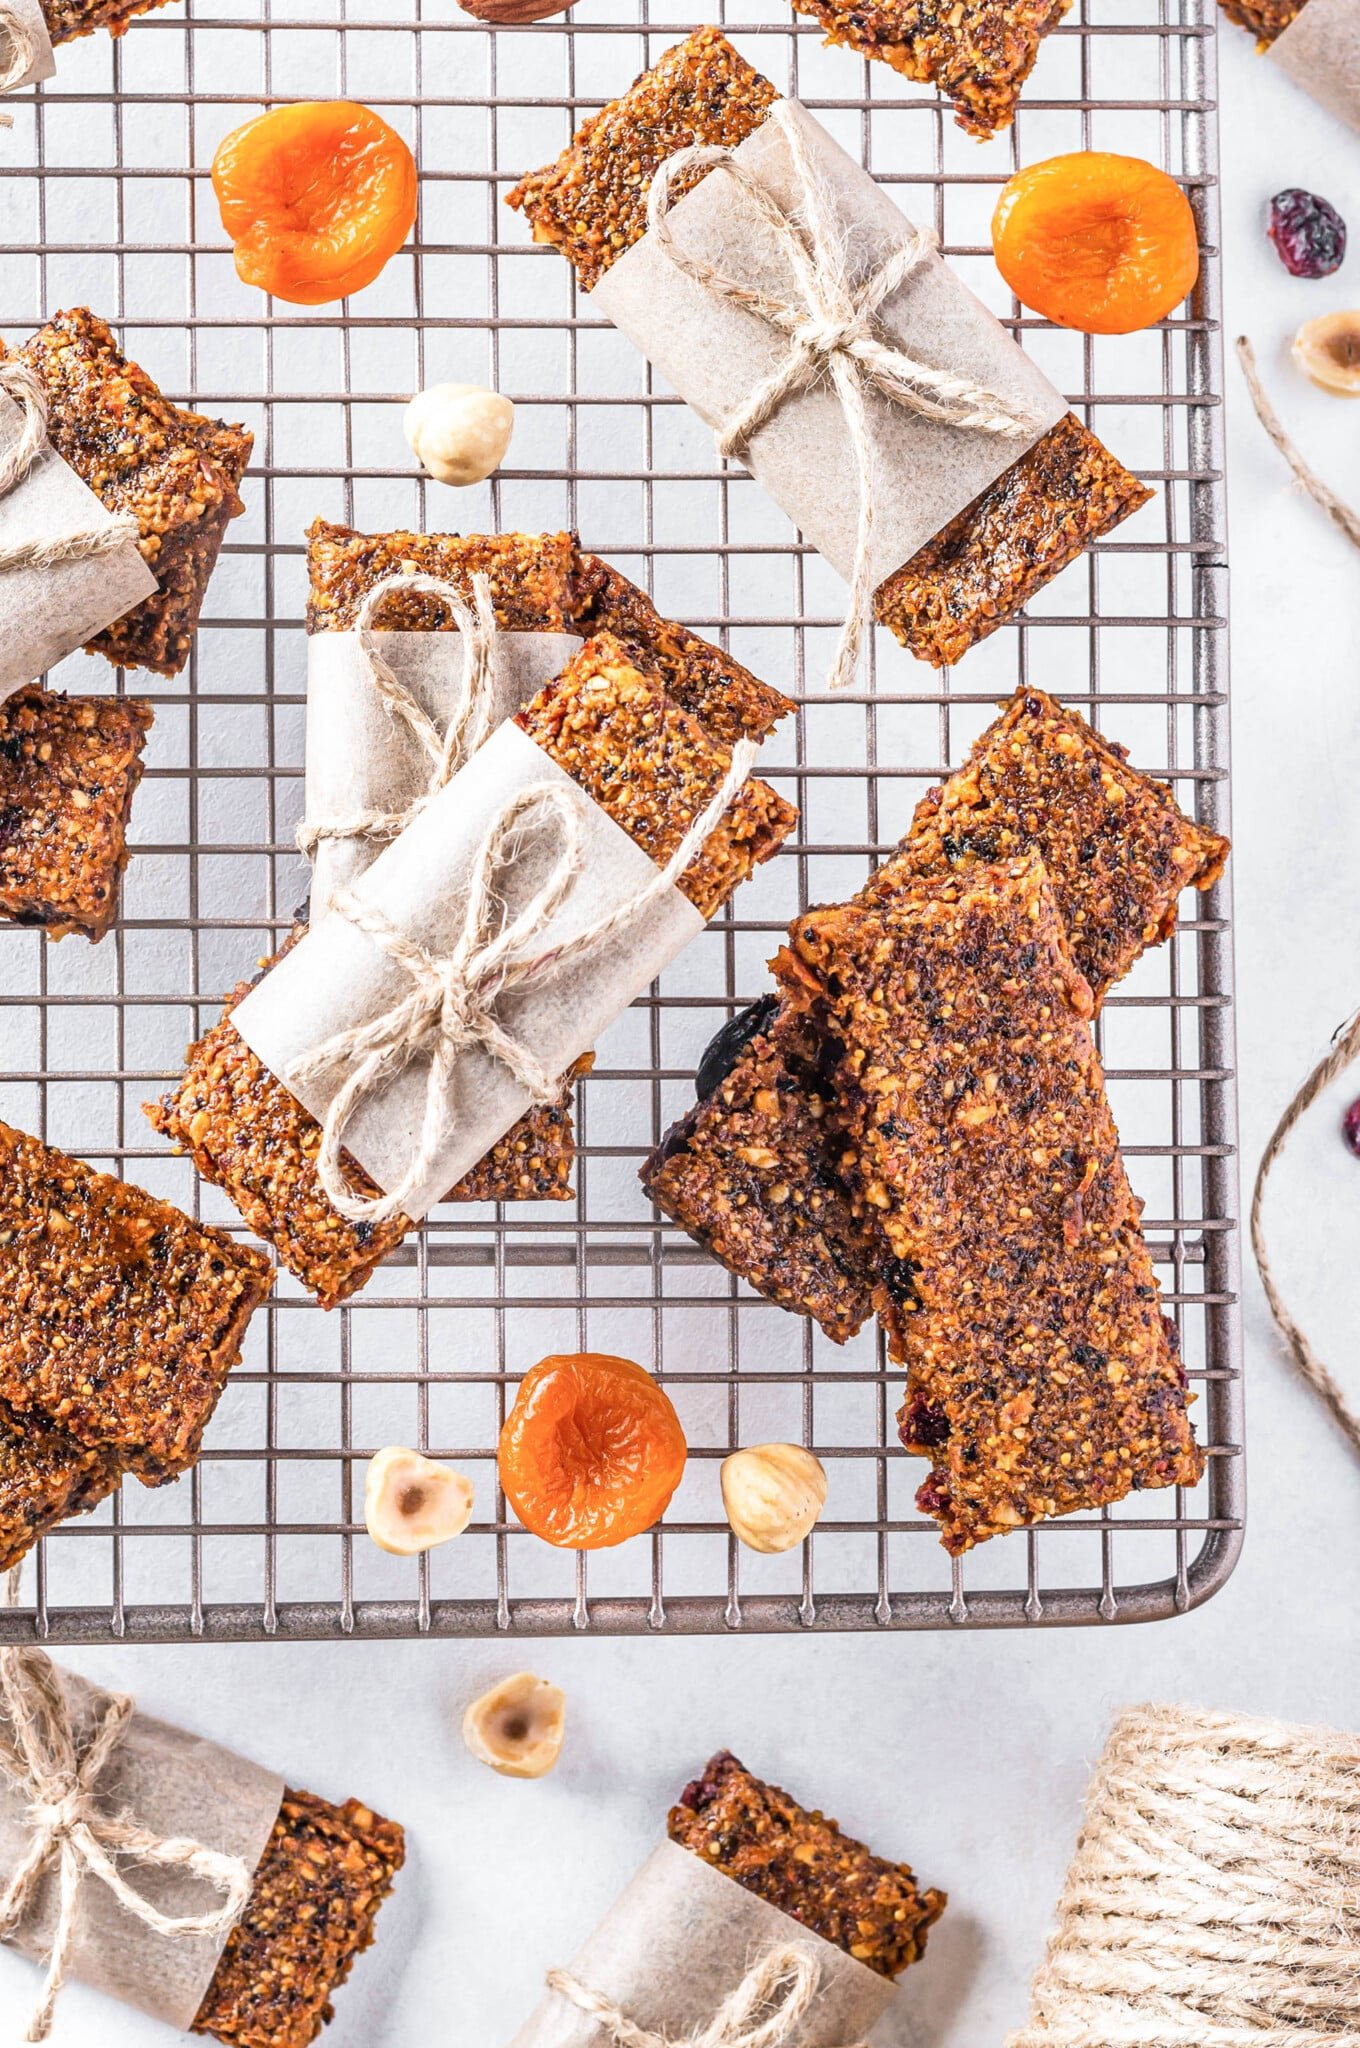 Gluten-Free Dried Fruit Bars with Nuts and Dates on The Go